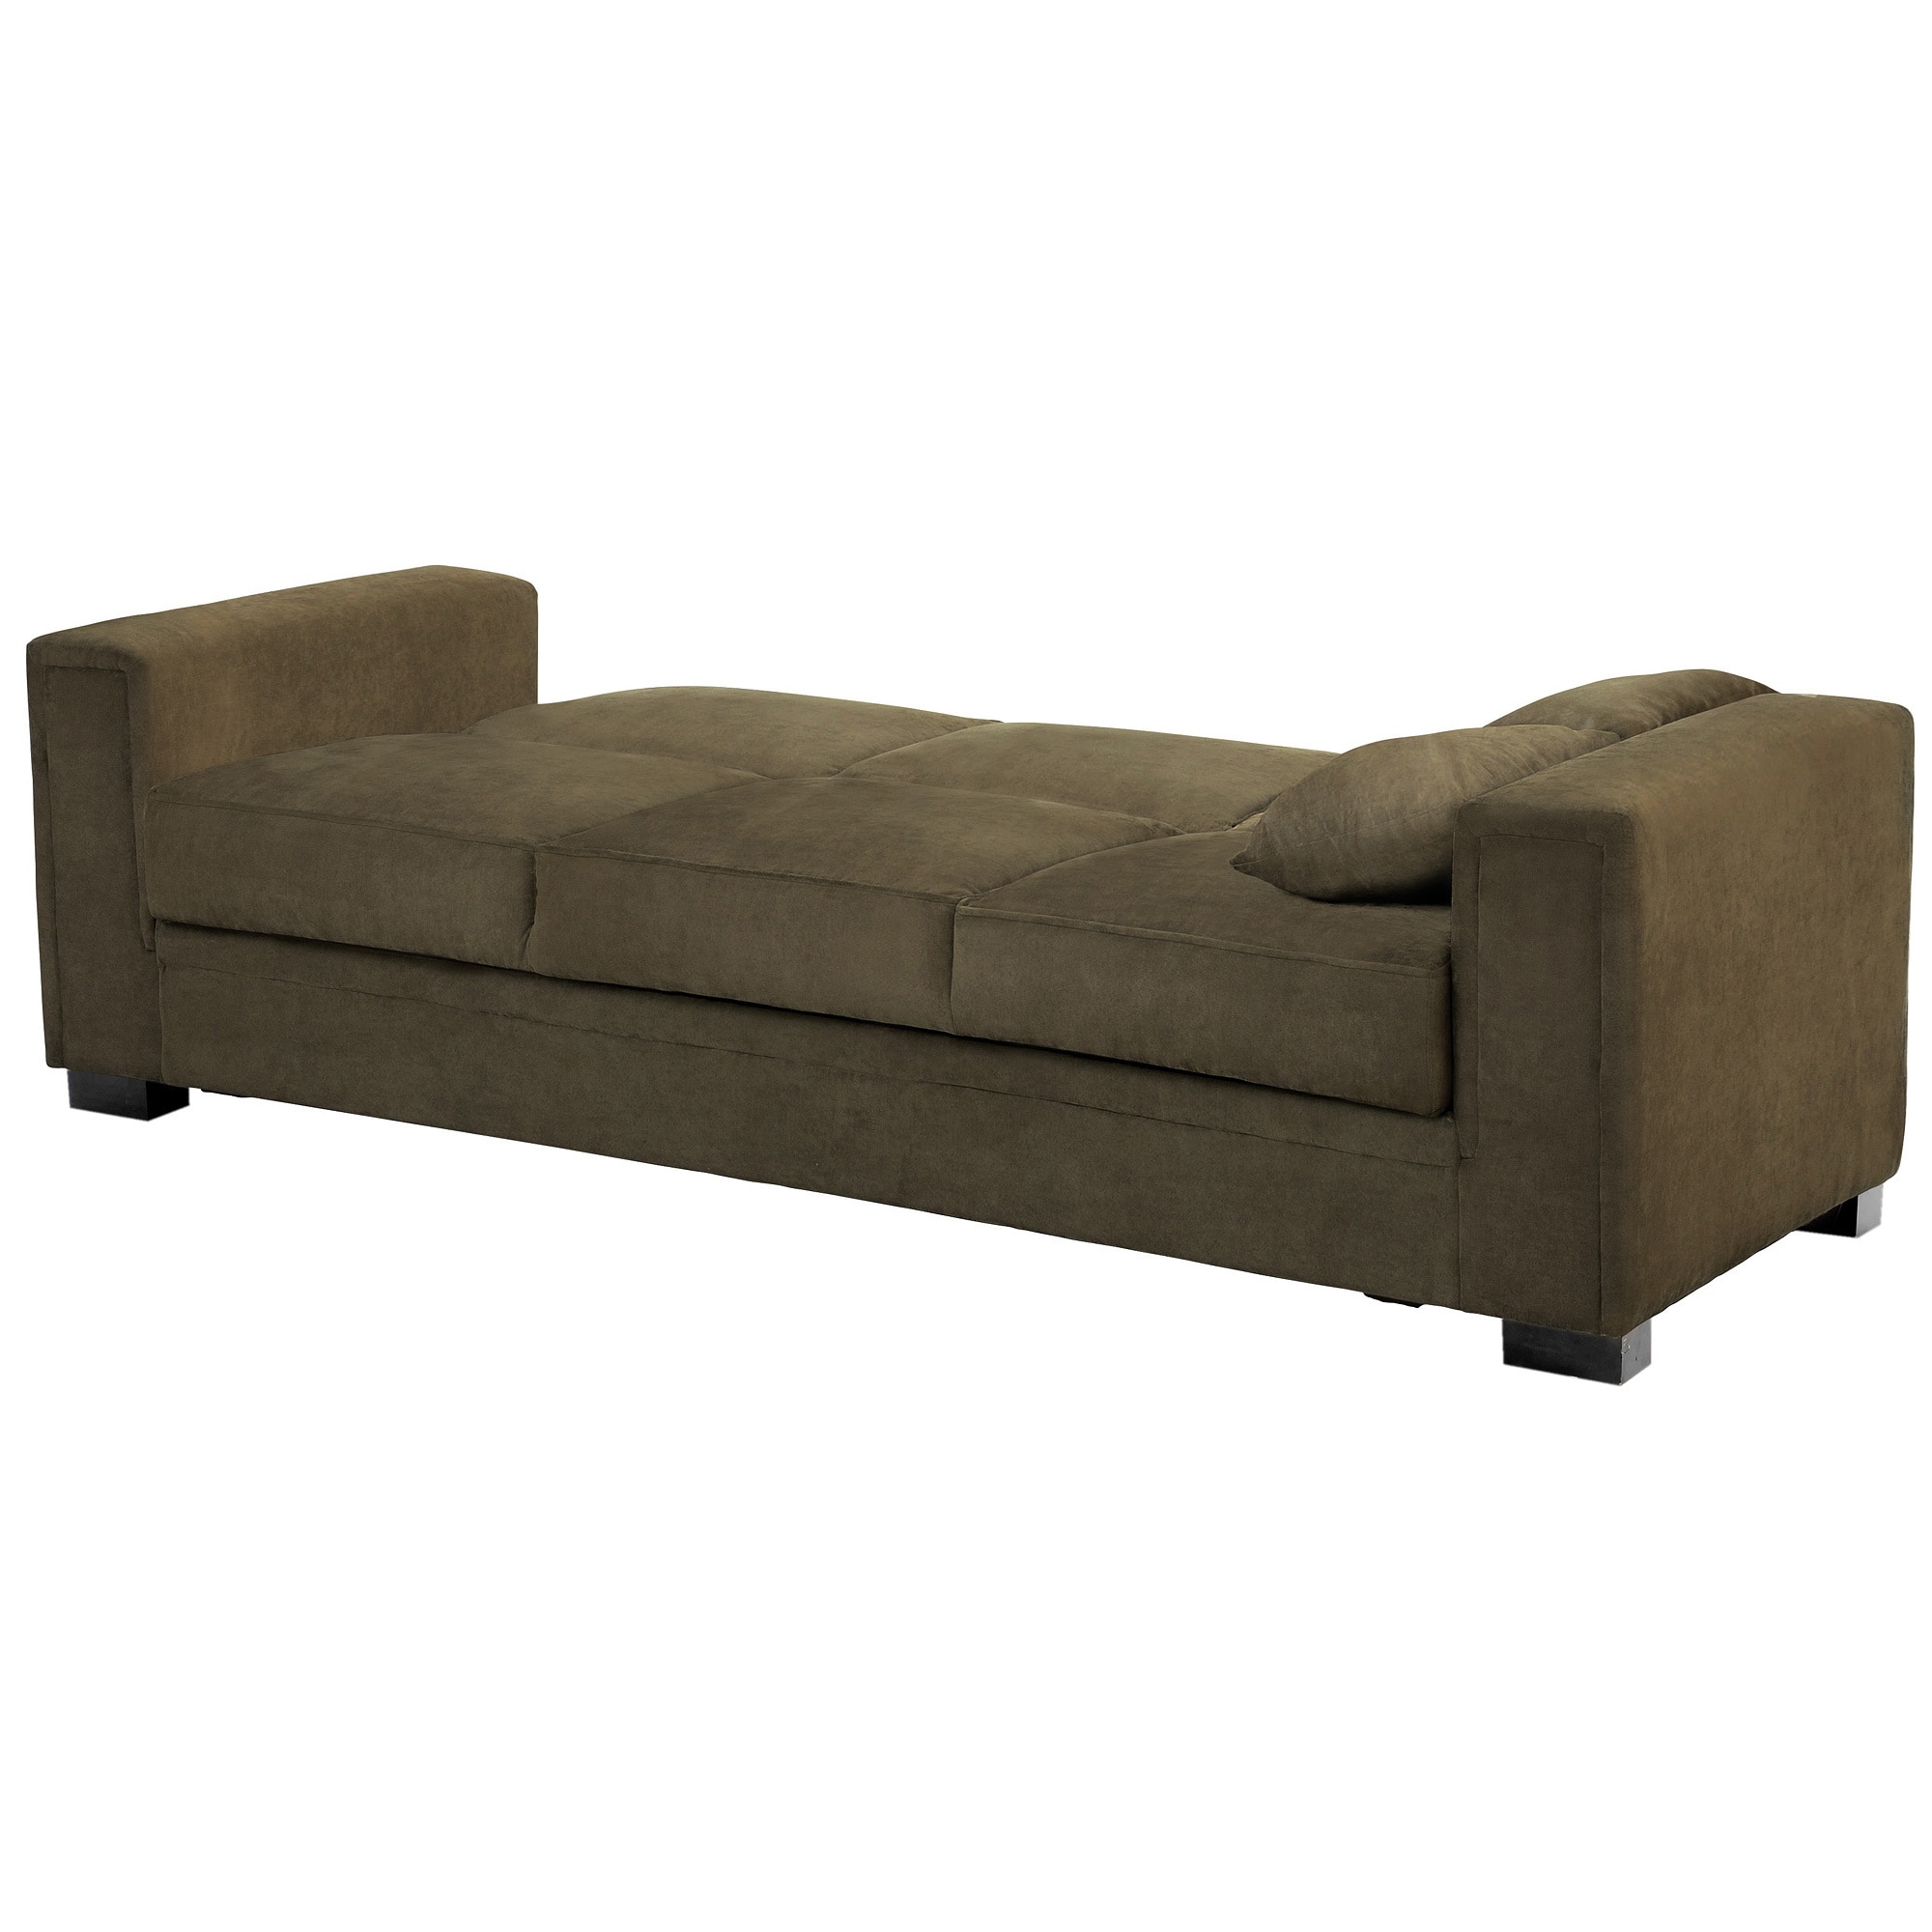 Serta Sabrina 72.6'' Queen Rolled Arm Tufted Back Convertible